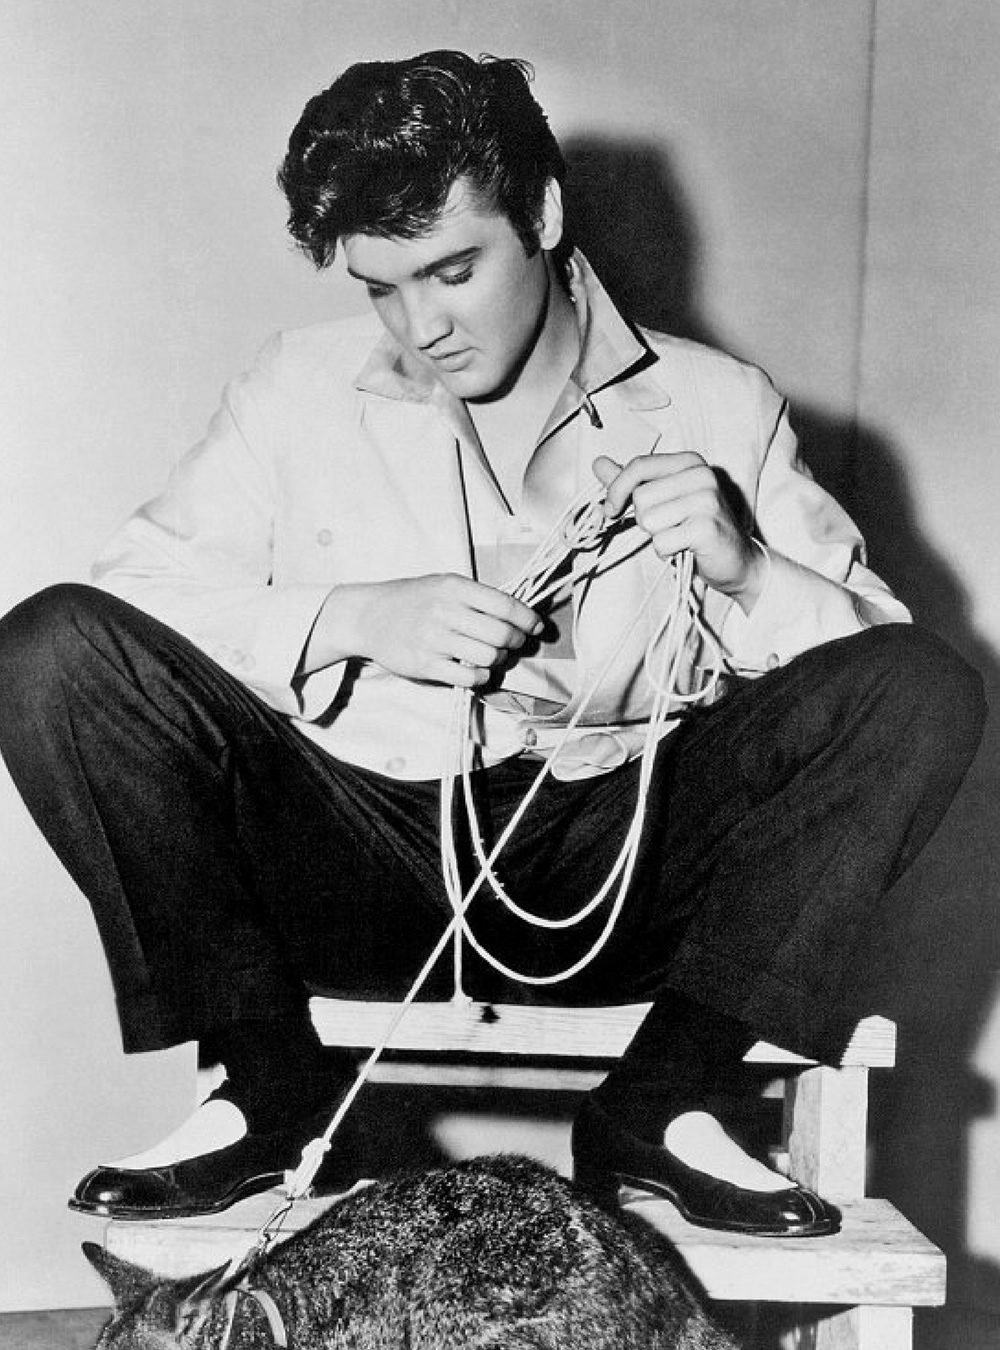 Elvis wearing white loafers